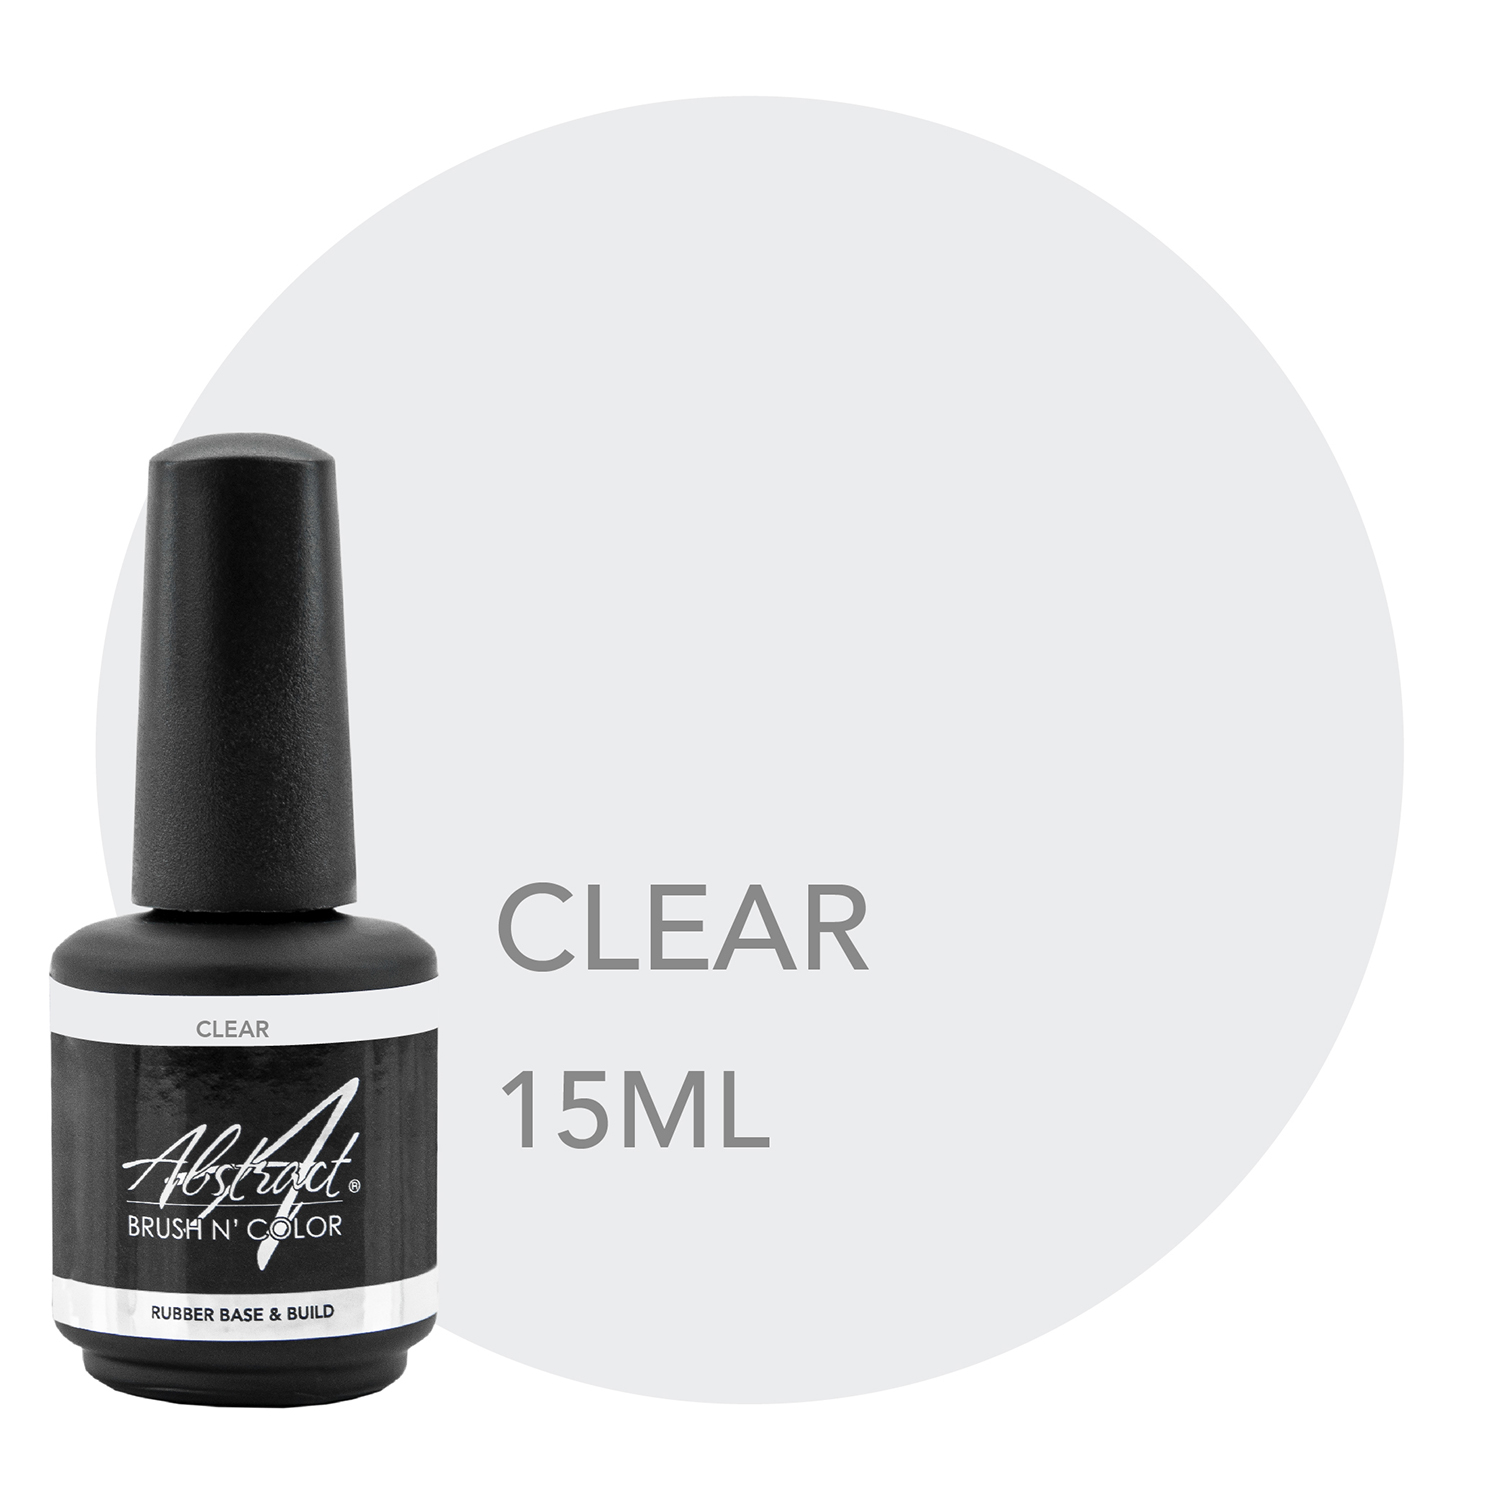 Rubber base & Build CLEAR 15ml, Abstract | 273067